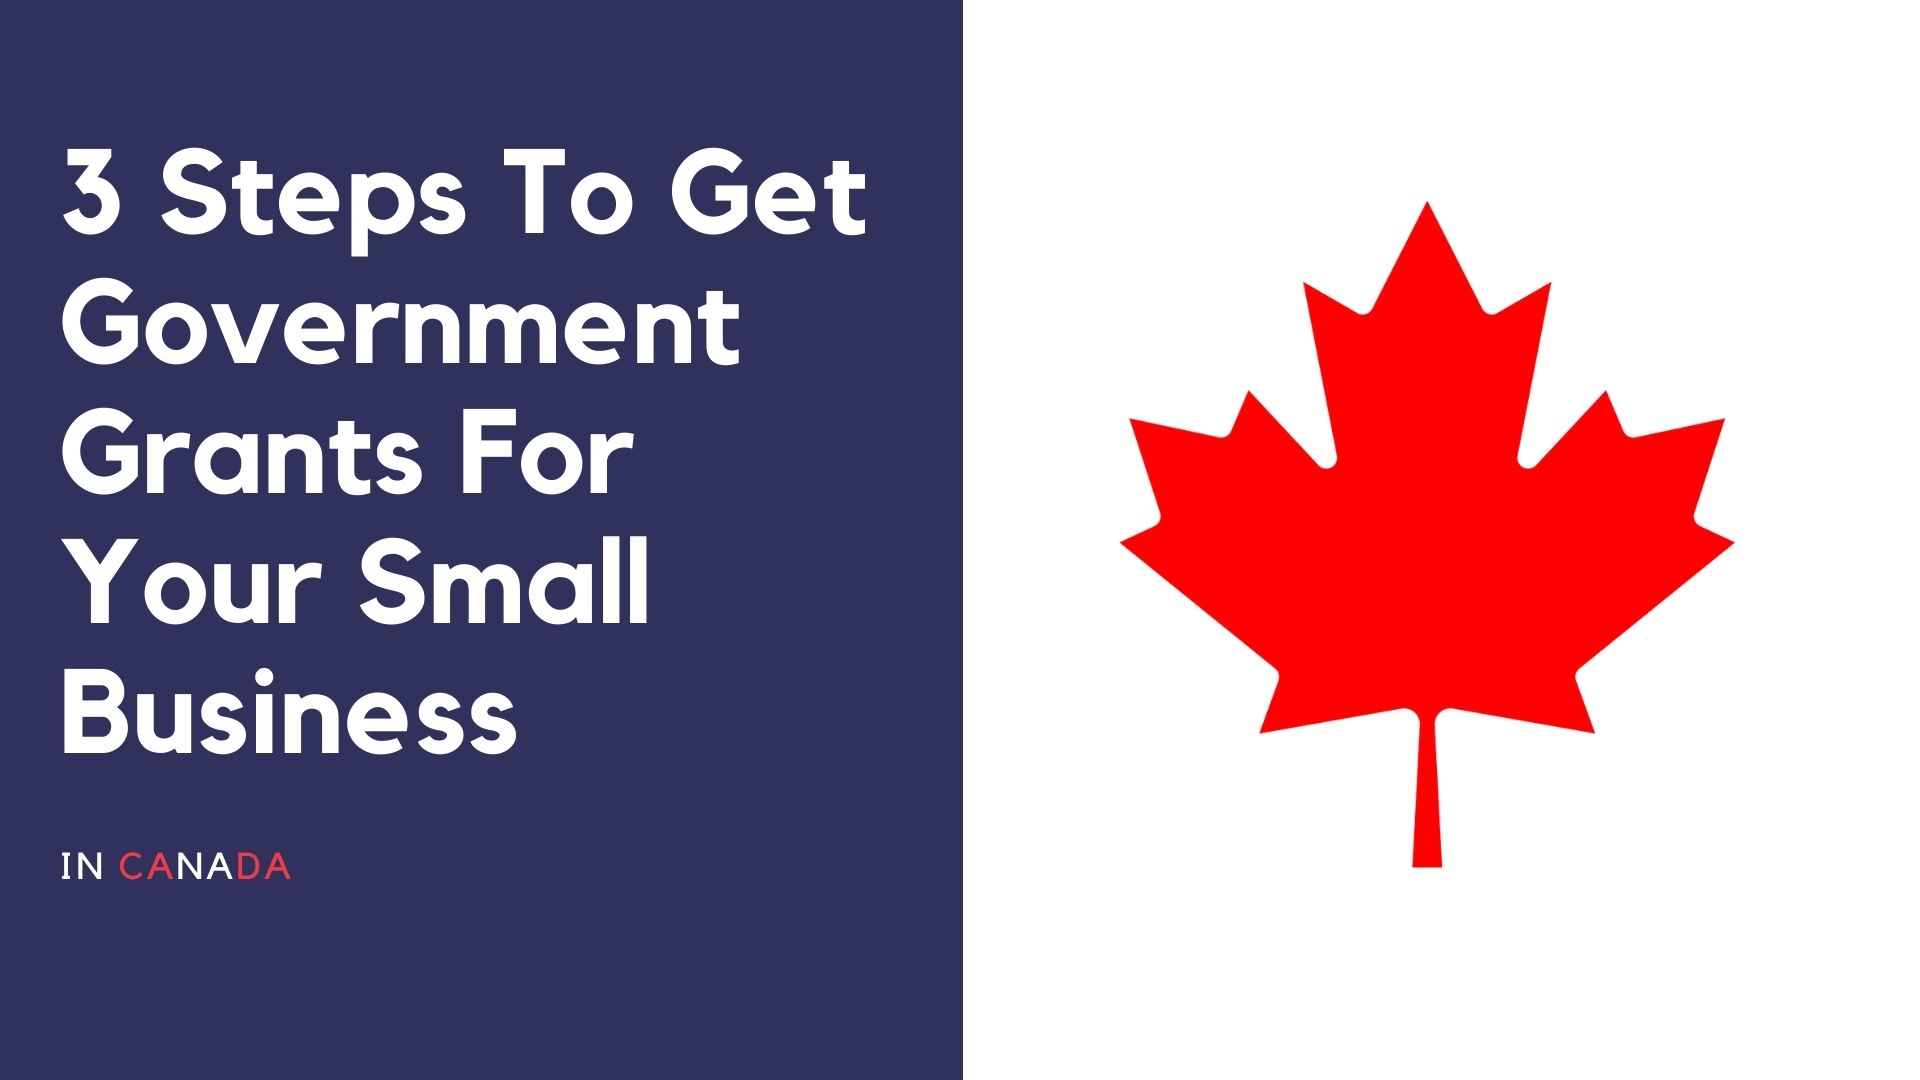 Get government grants for your small business